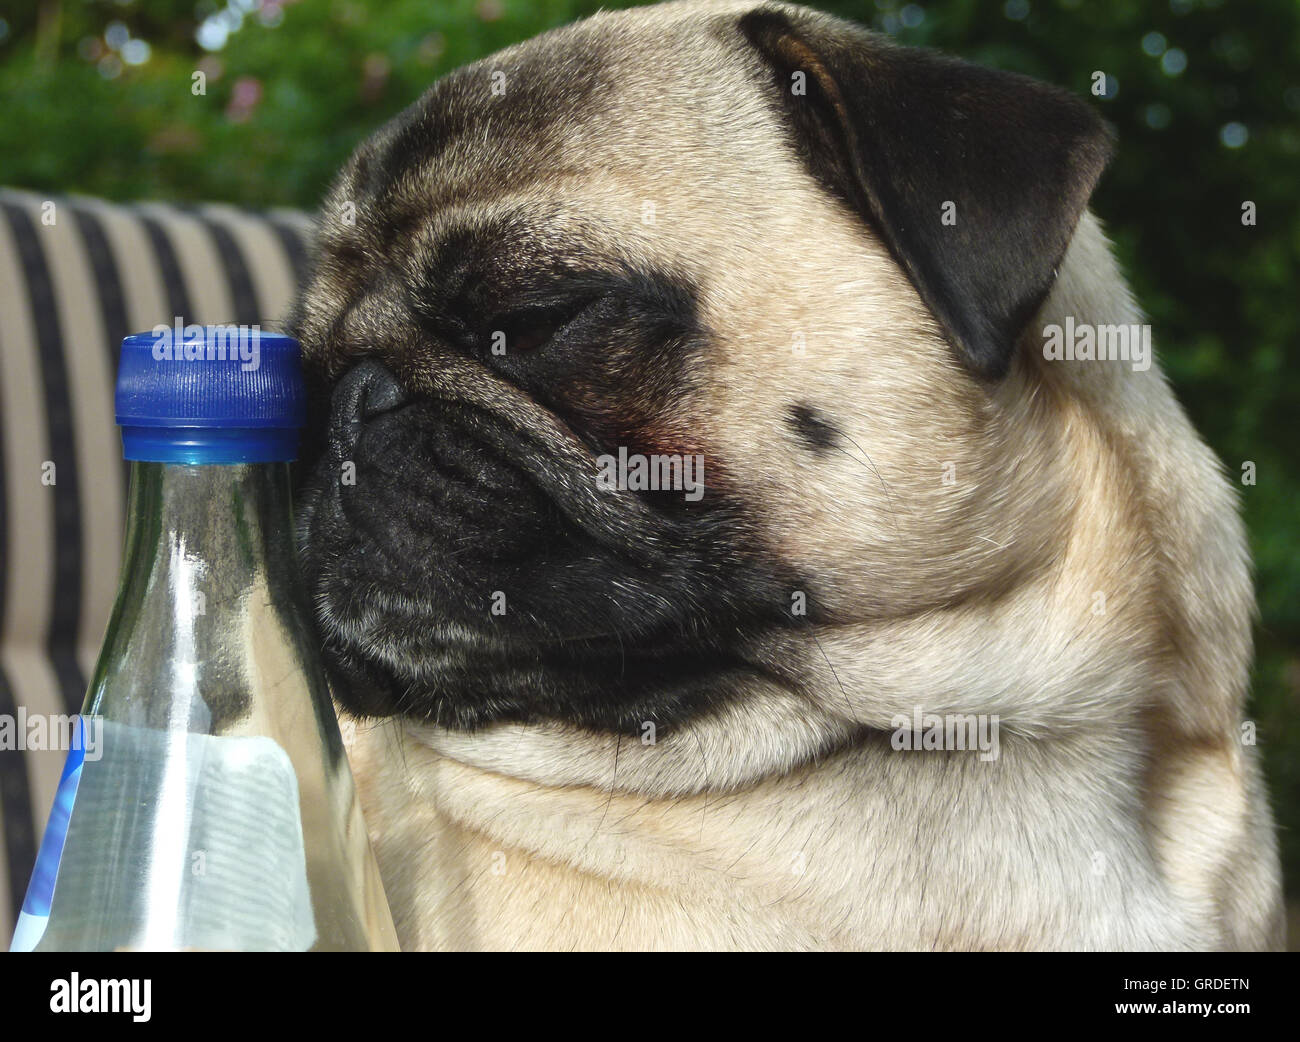 Beige Pug In Portrait Wants To Drink And Considers How To Open The Bottle Of Water Stock Photo